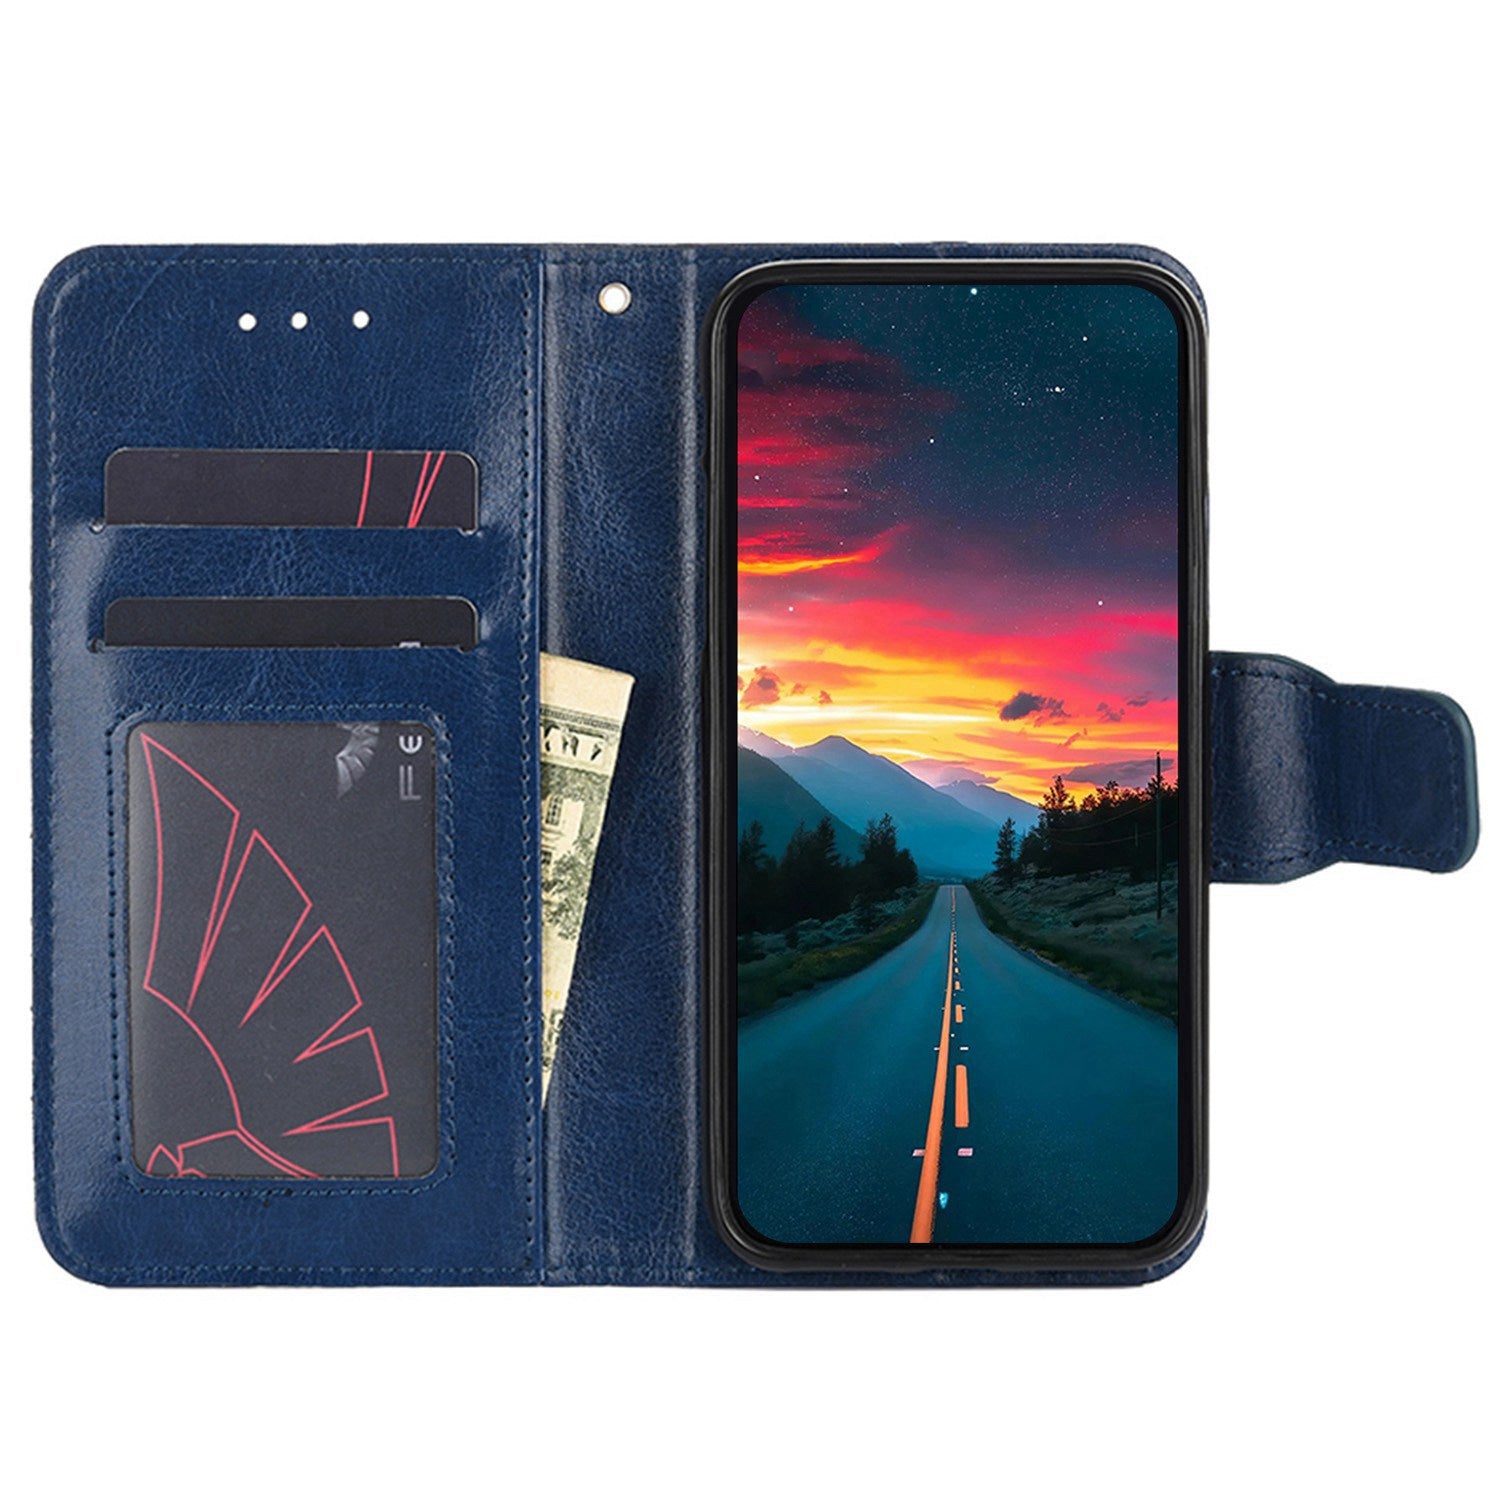 Uniqkart for Infinix Hot 30i Textured PU Leather Wallet Stand Case Anti-scratch Phone Cover - Sapphire